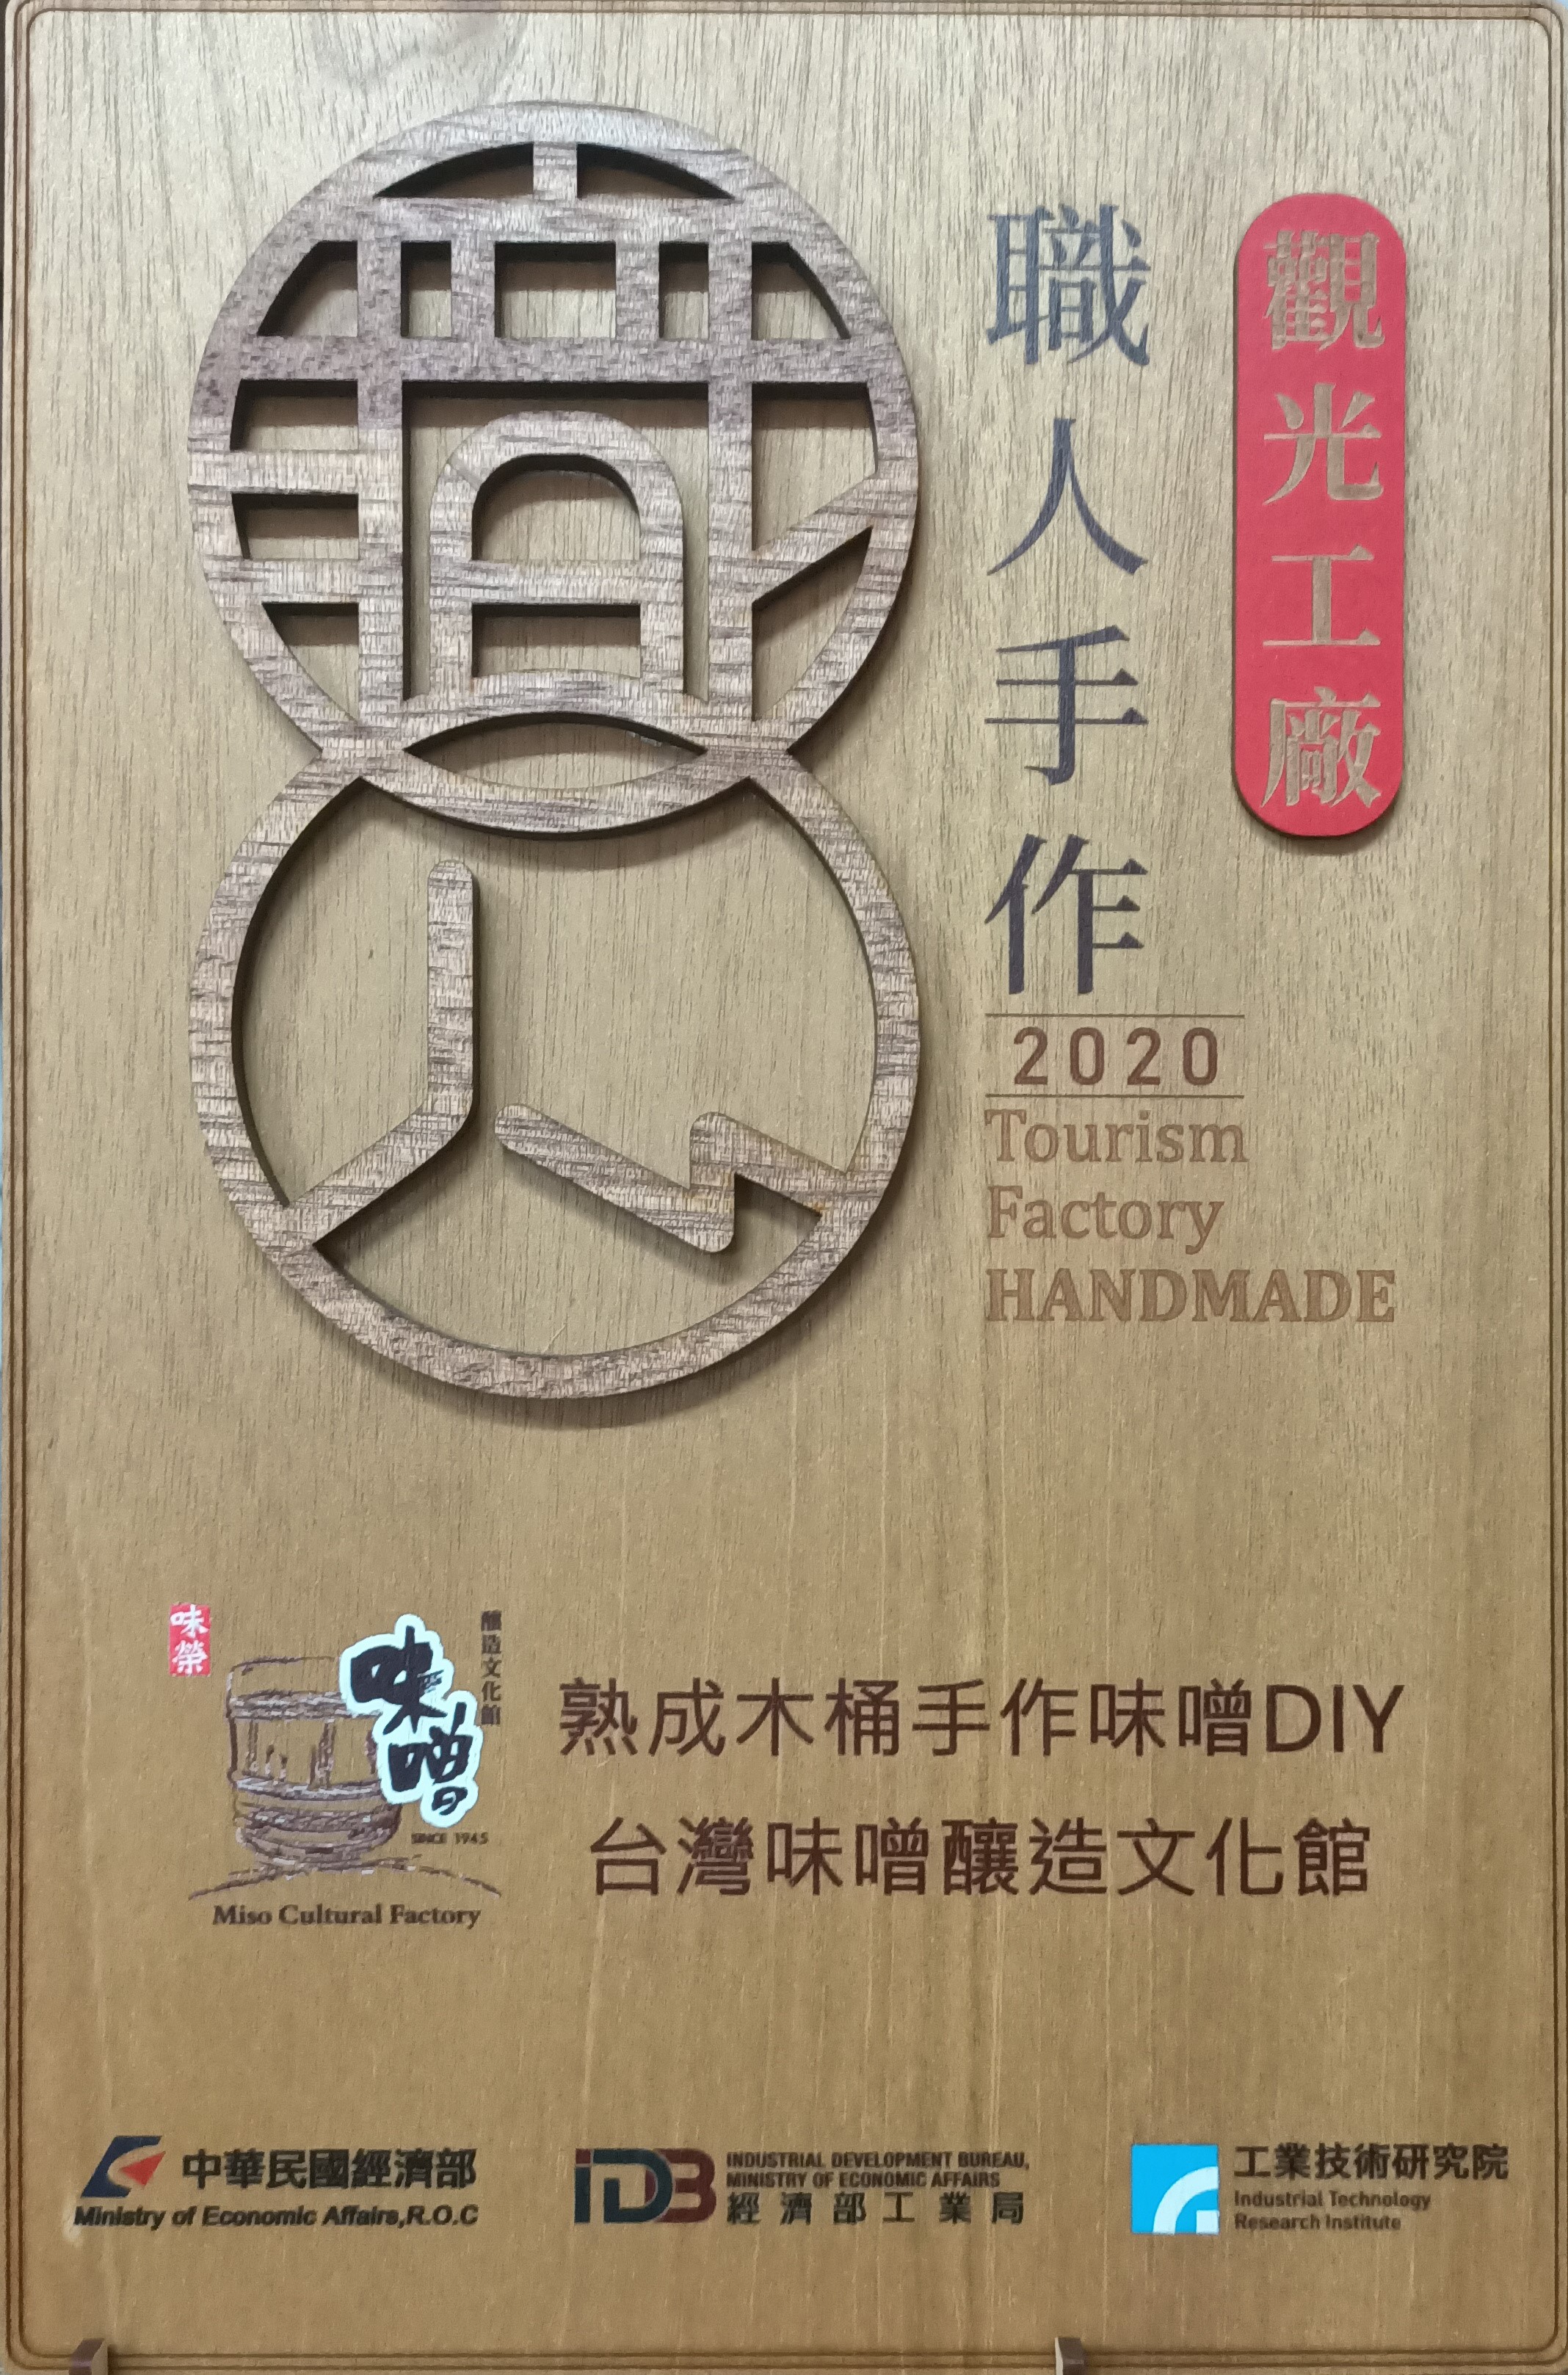 [DIY DIY Miso Made in Aged Wooden Barrels] Taiwan Miso Brewing Cultural Center Experience Tour, won the Ministry of Economic Affairs Tourism Factory's "Handmade by Craftsman" Award